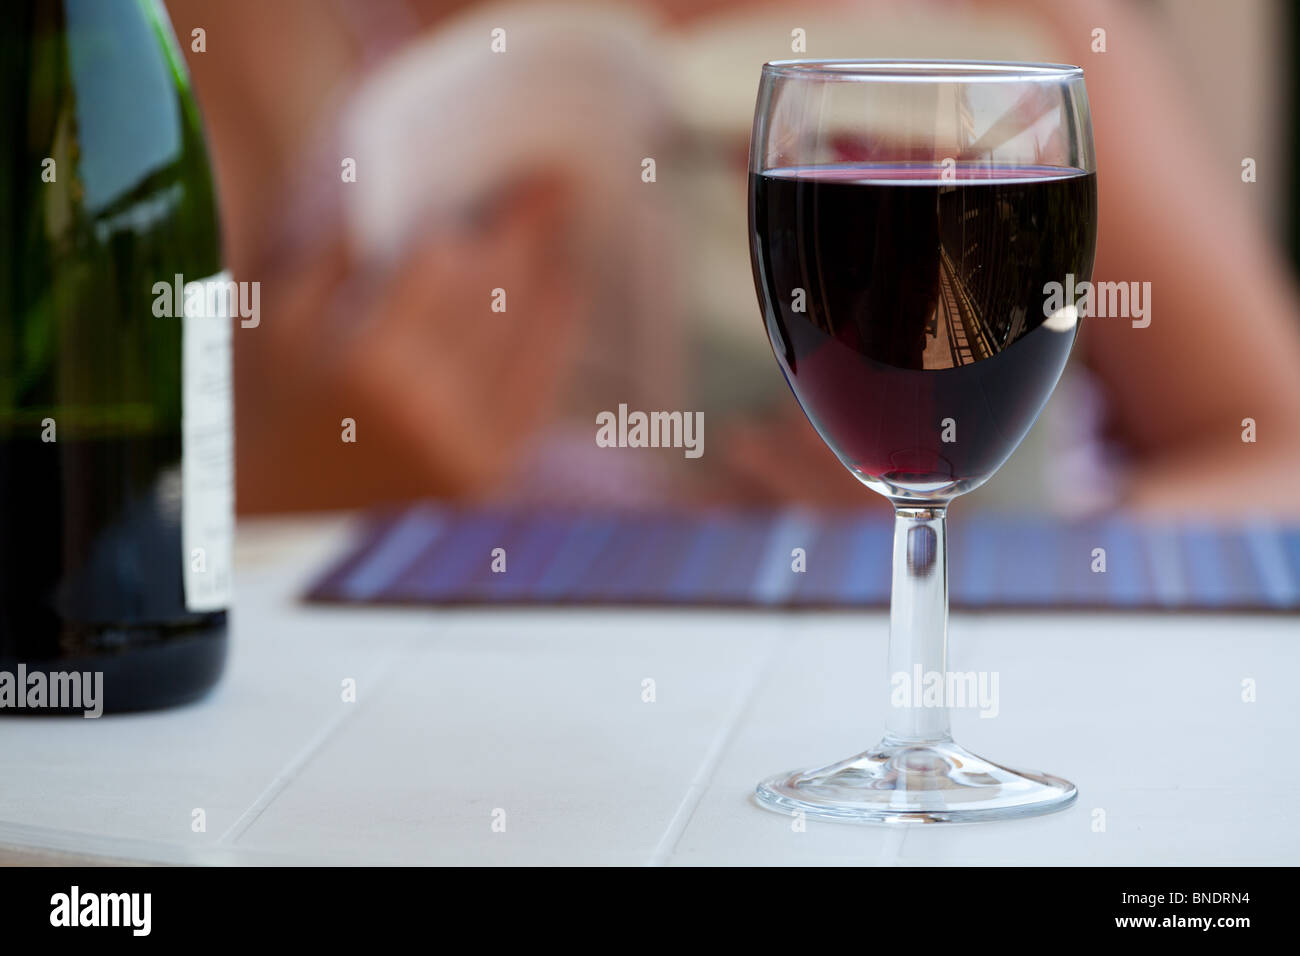 A glass of red wine on an outside table. A woman can be seen relaxing with a book in the background, Cannes france Stock Photo